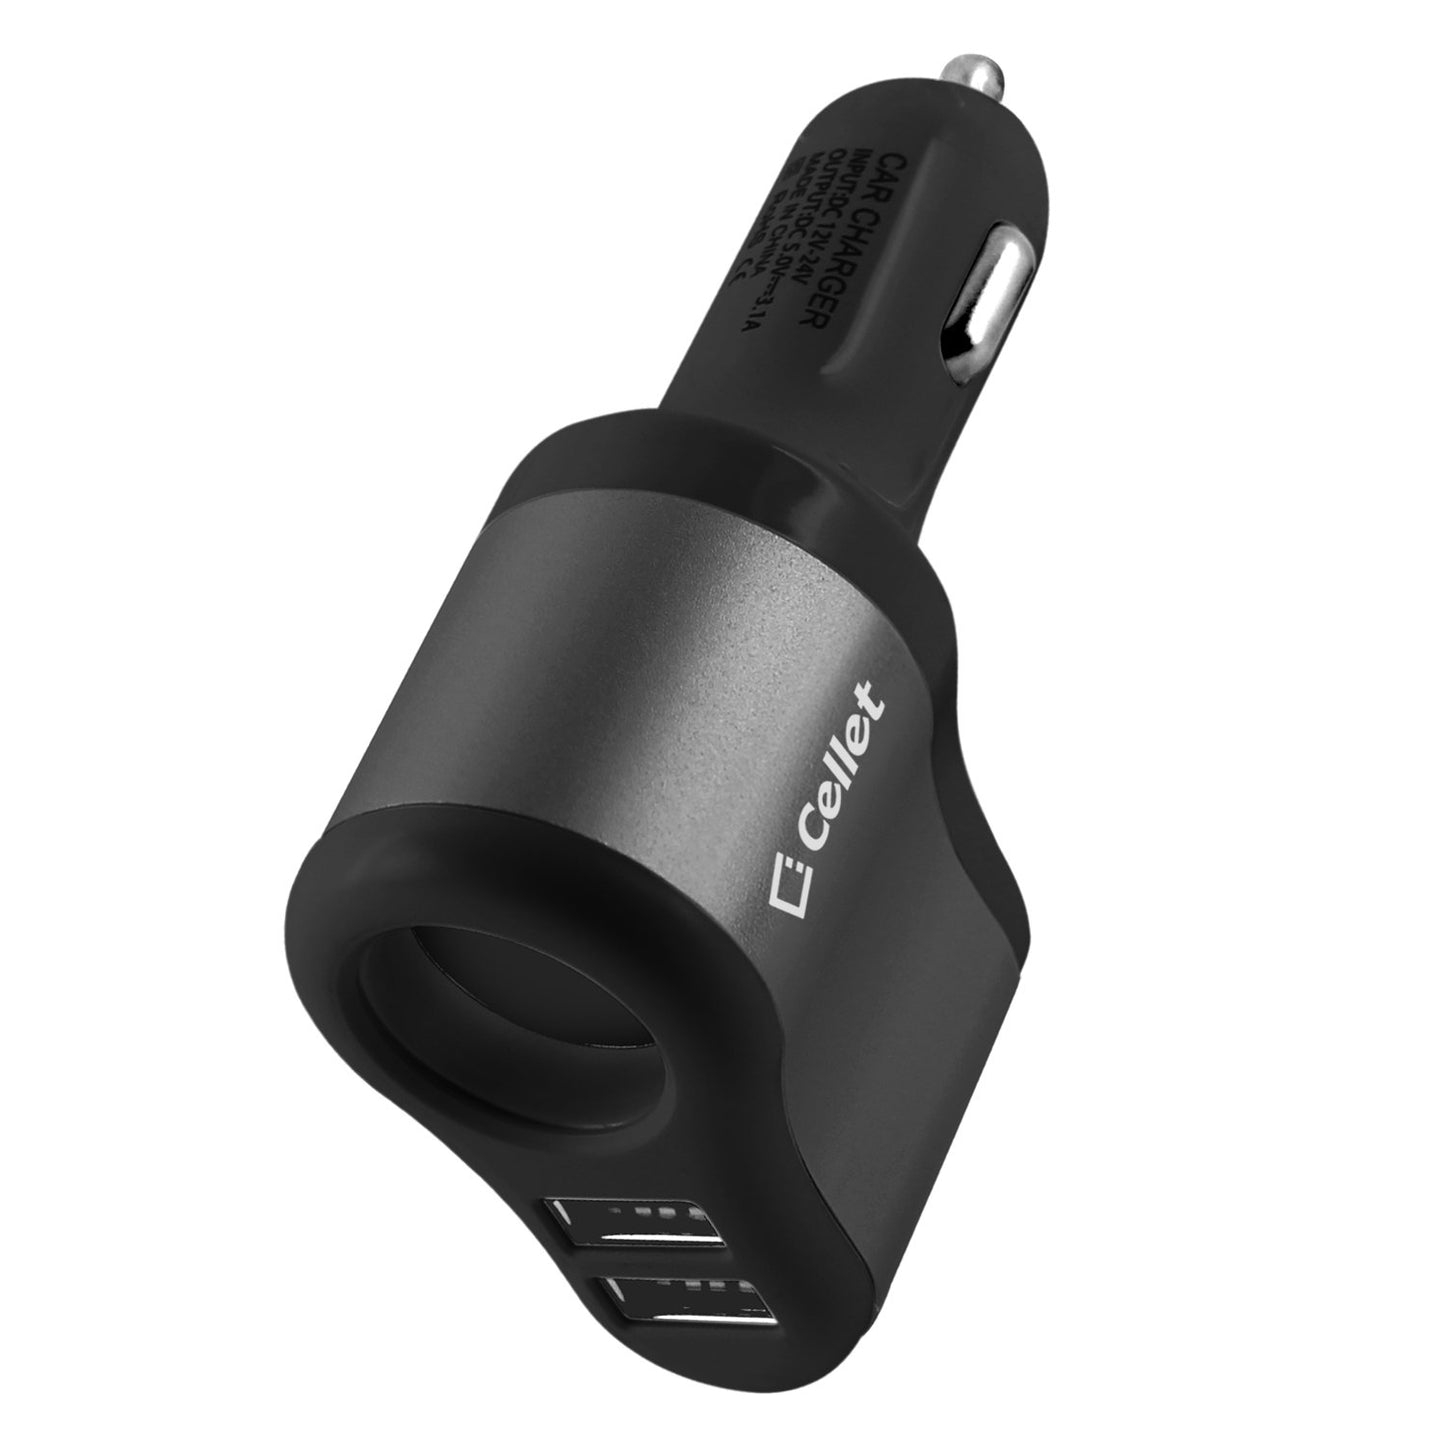 PUSBDC3ABK - Cellet 3 in 1 Car Charger with 2 USB Ports and 1 Car Socket Lighter Adapter - Black/Space Gray